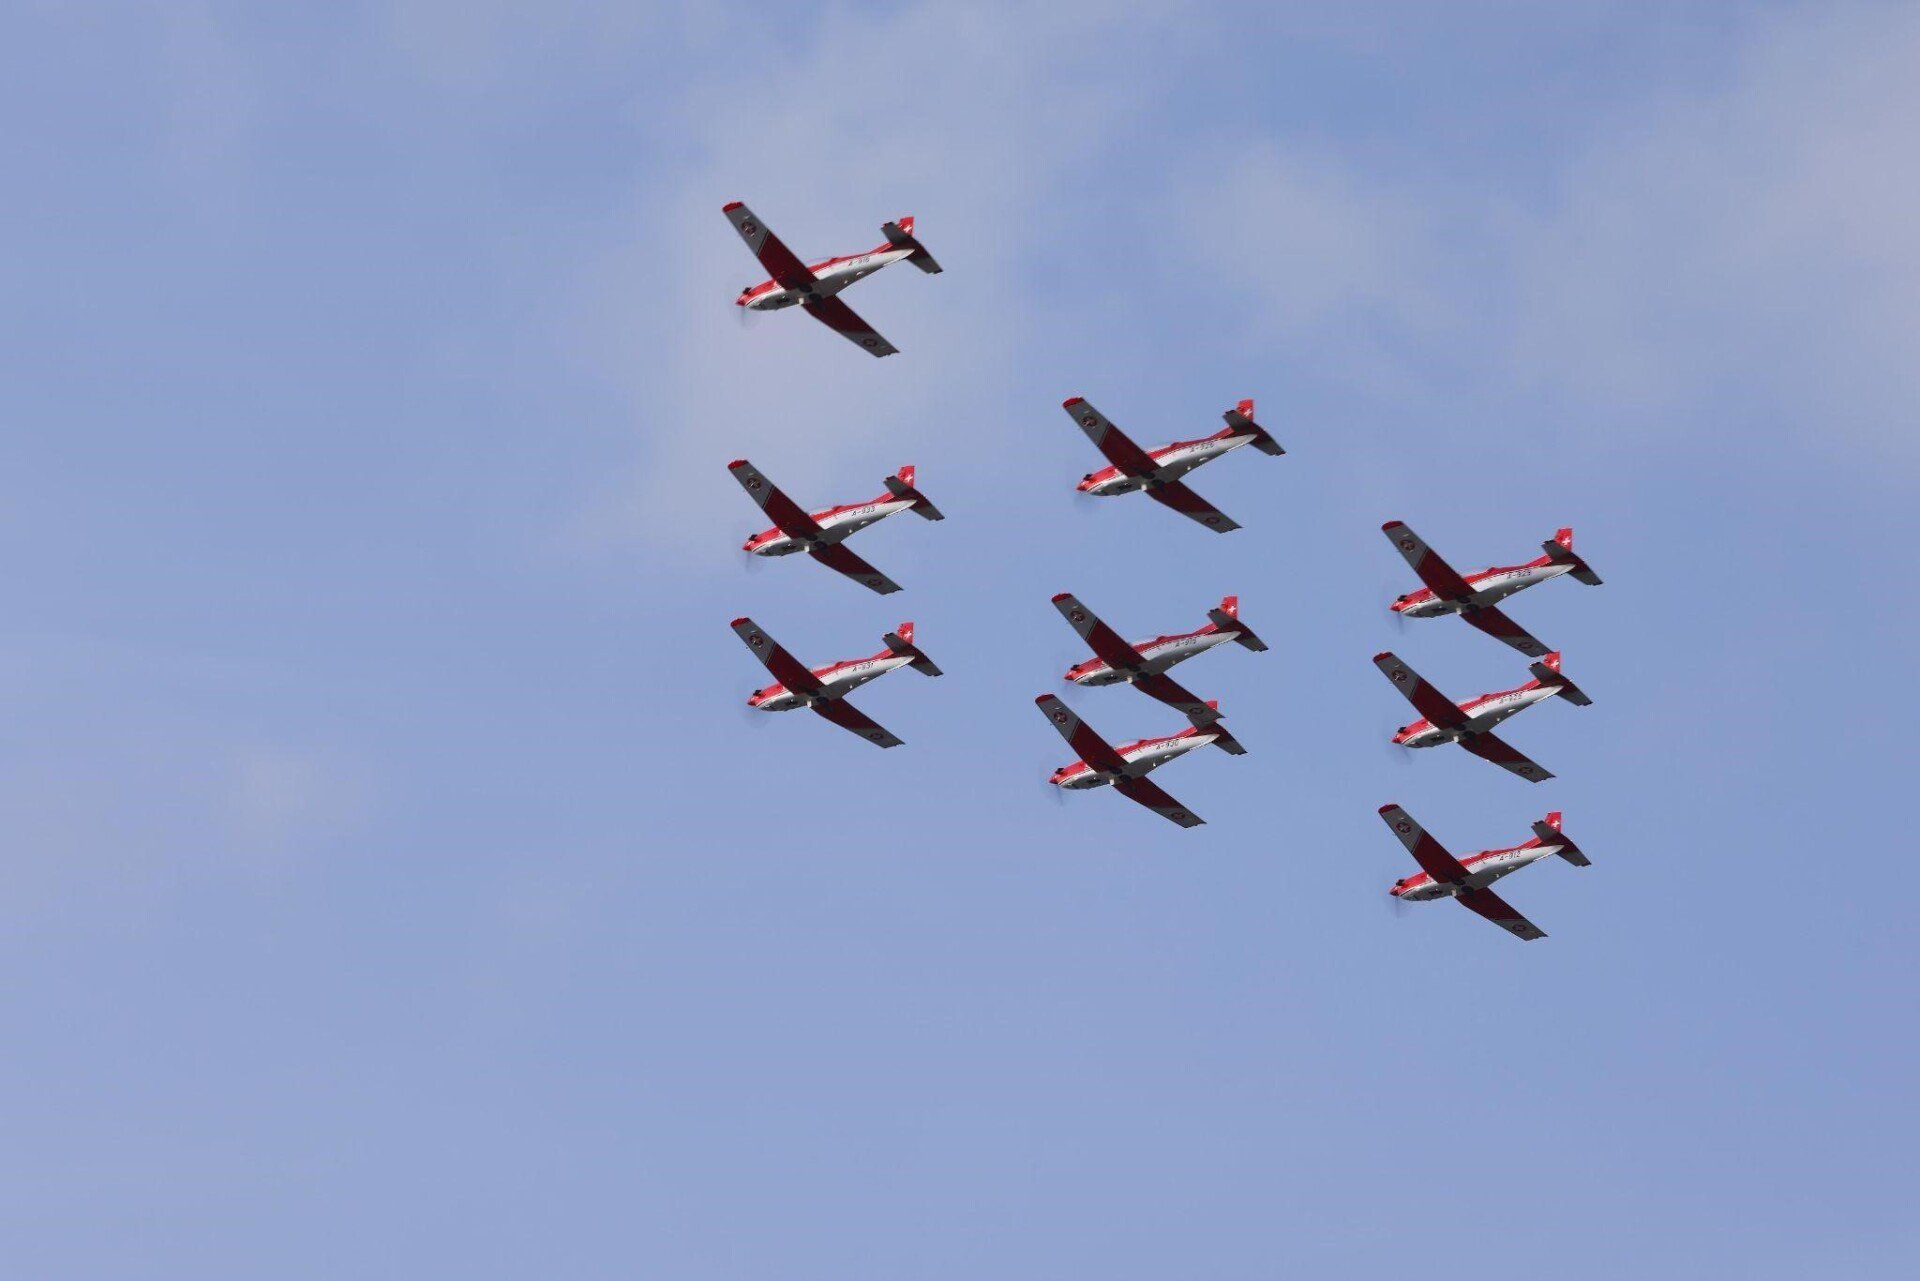 Group of aerobatic planes flying together